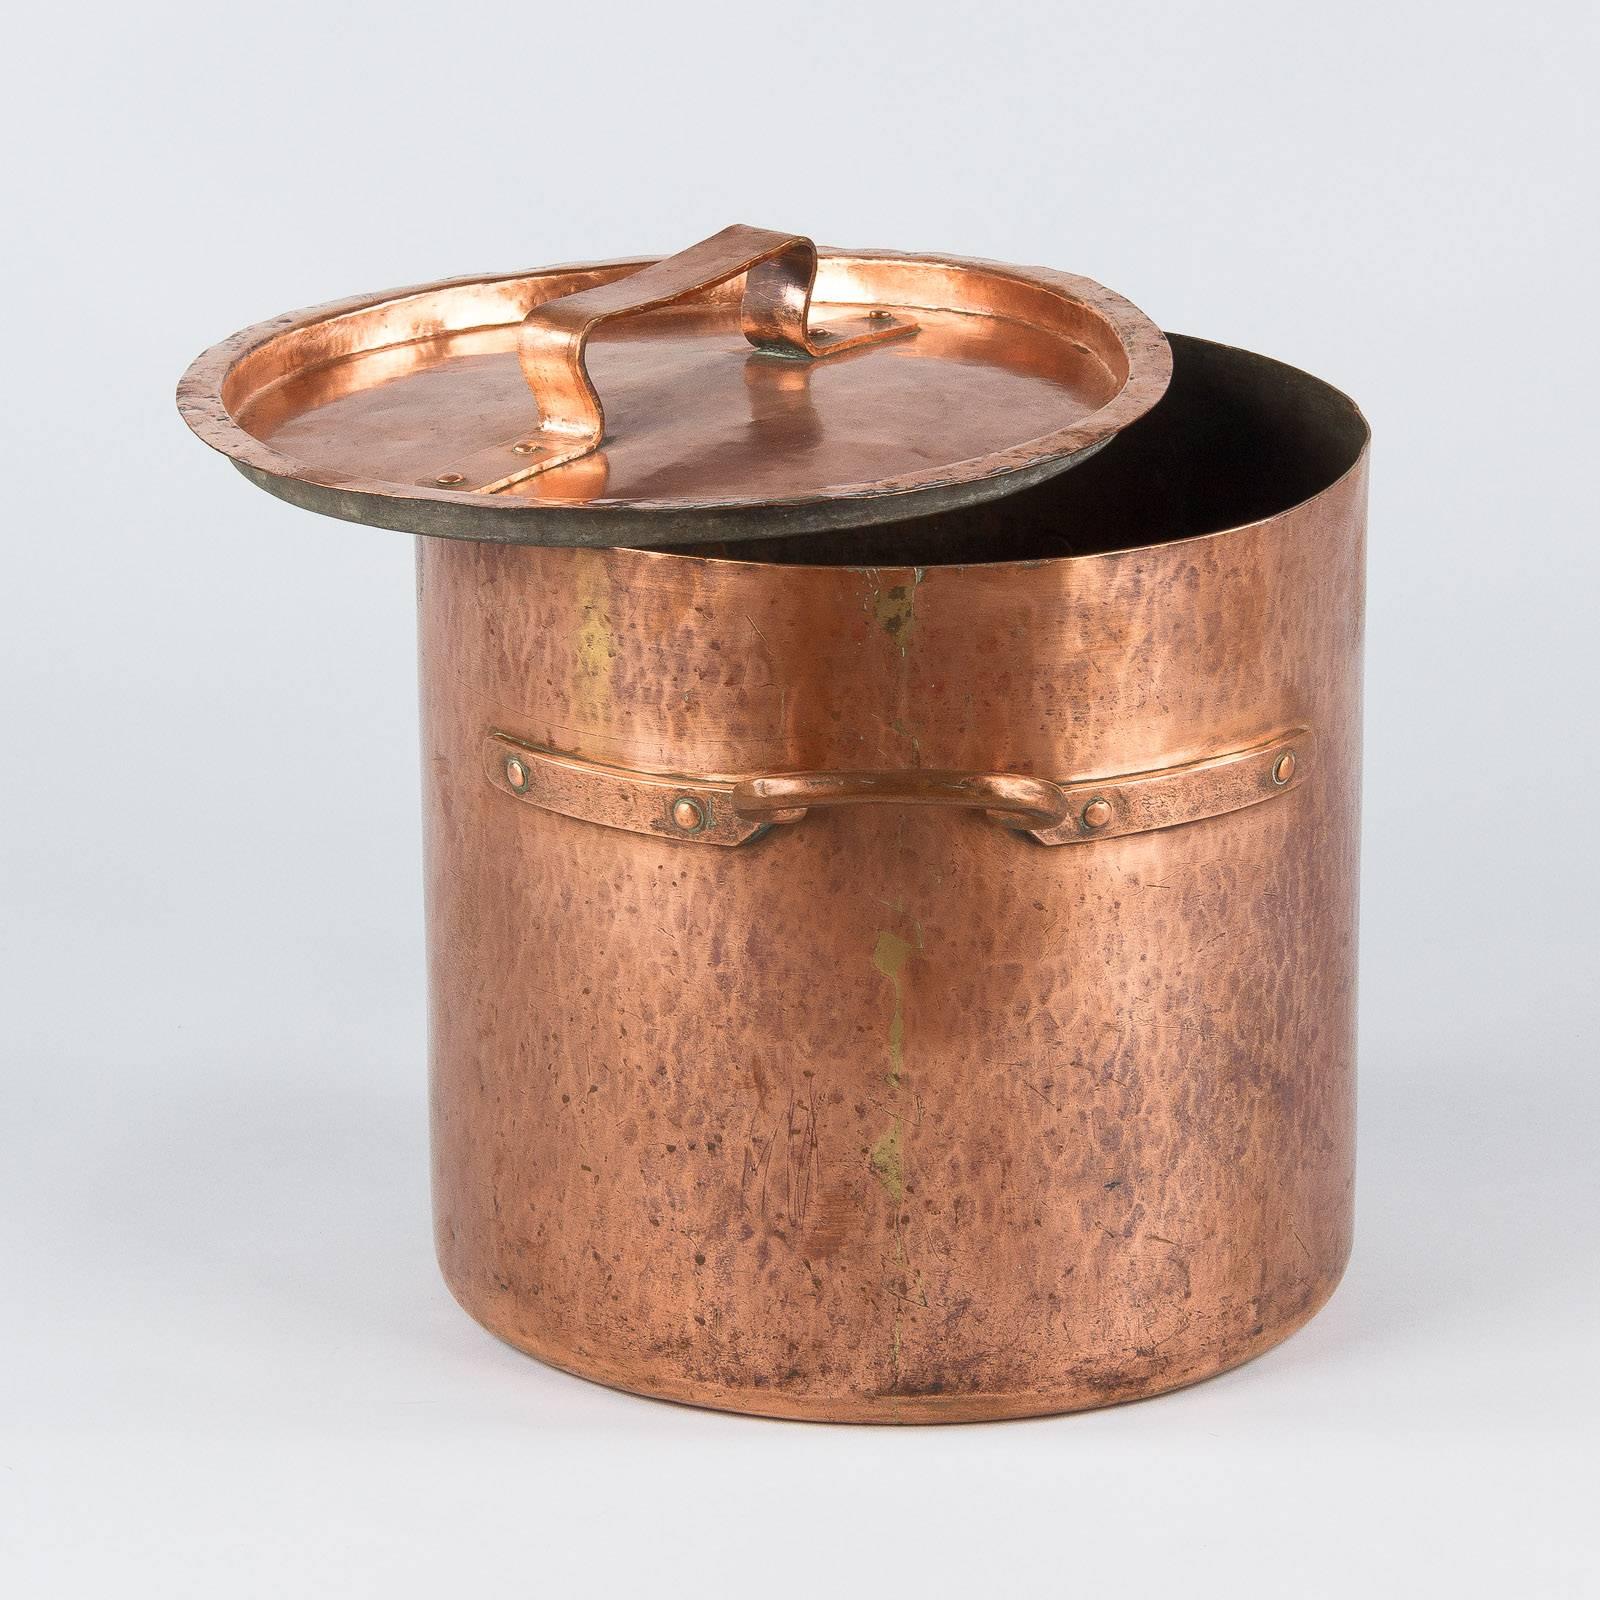 French Provincial French Copper Cauldron, 19th Century